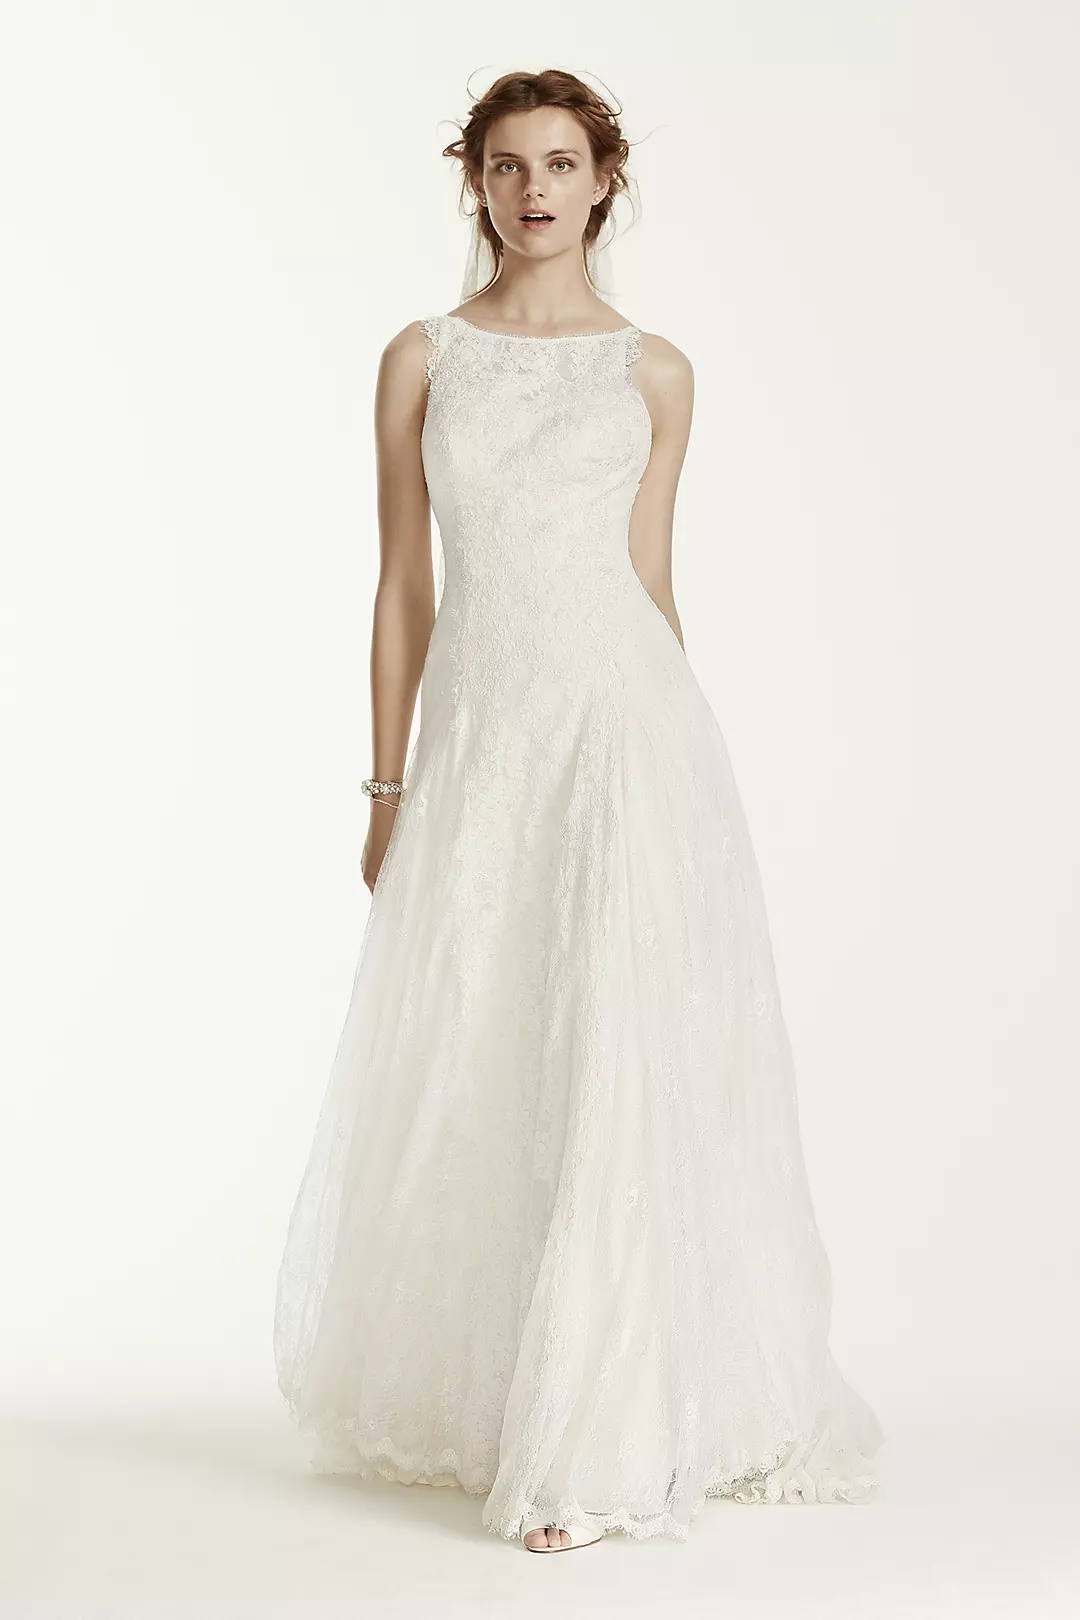 As-Is Lace Wedding Dress with High Neck Image